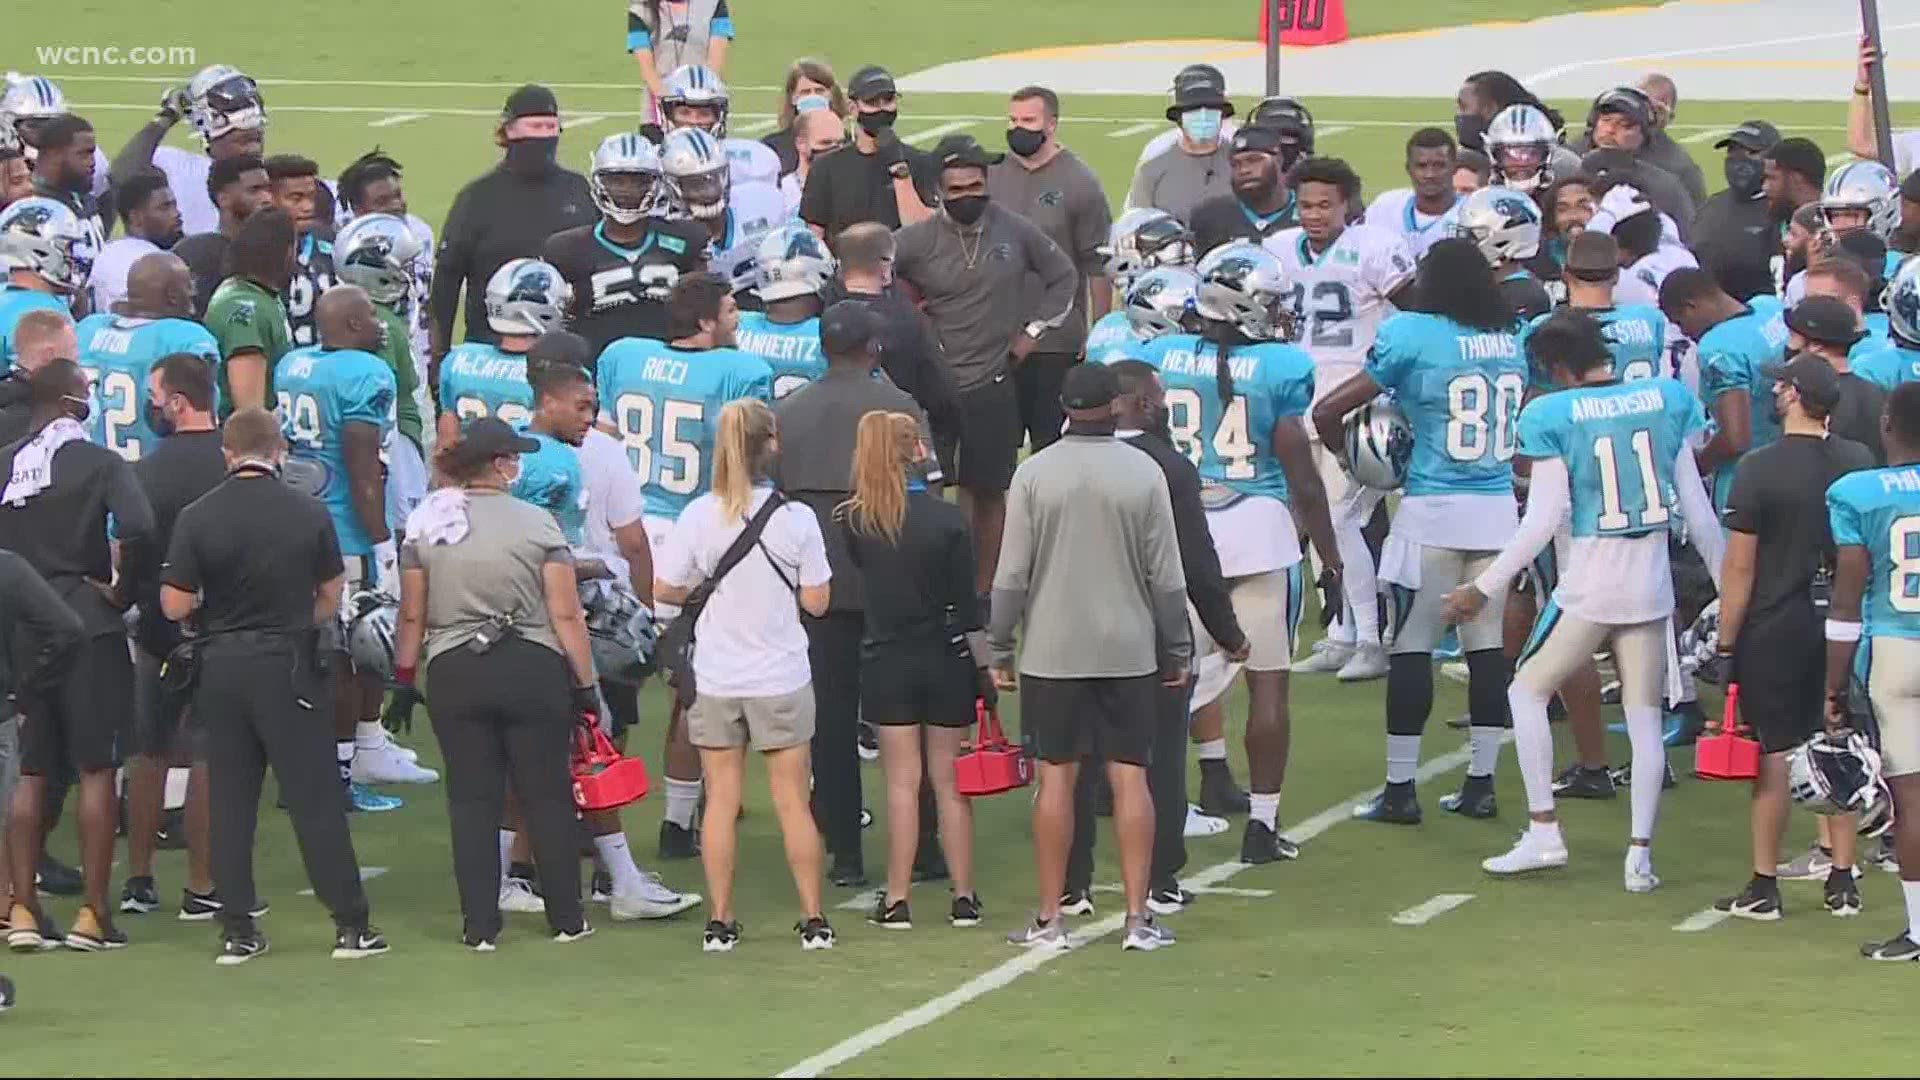 Just hours after several NBA teams walked out of playoff games in protest, the Panthers had mixed feelings about its practice.